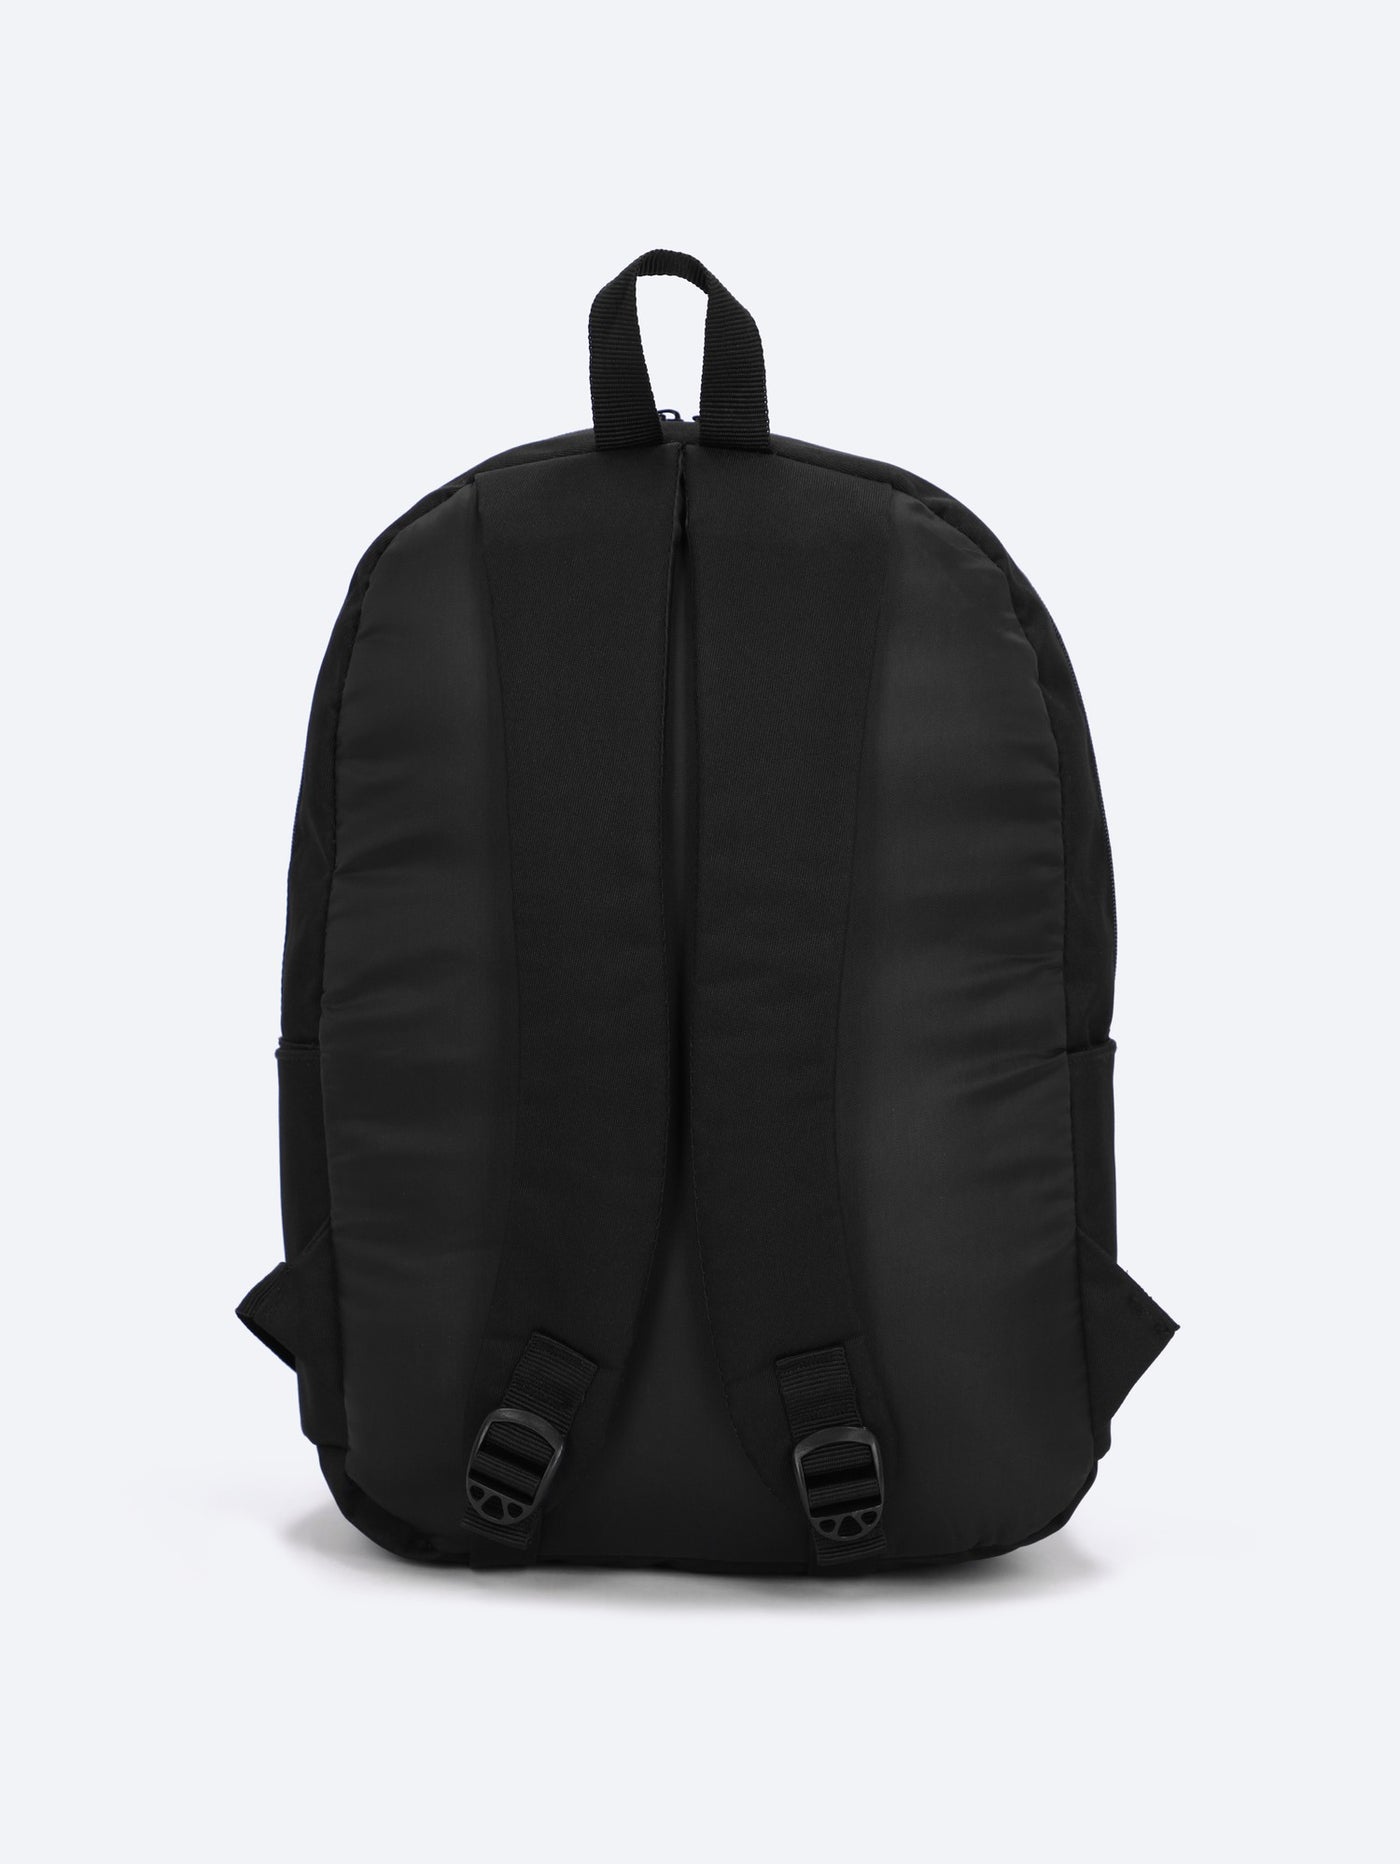 Force Unisex Backpack - Black with Gray Zipper